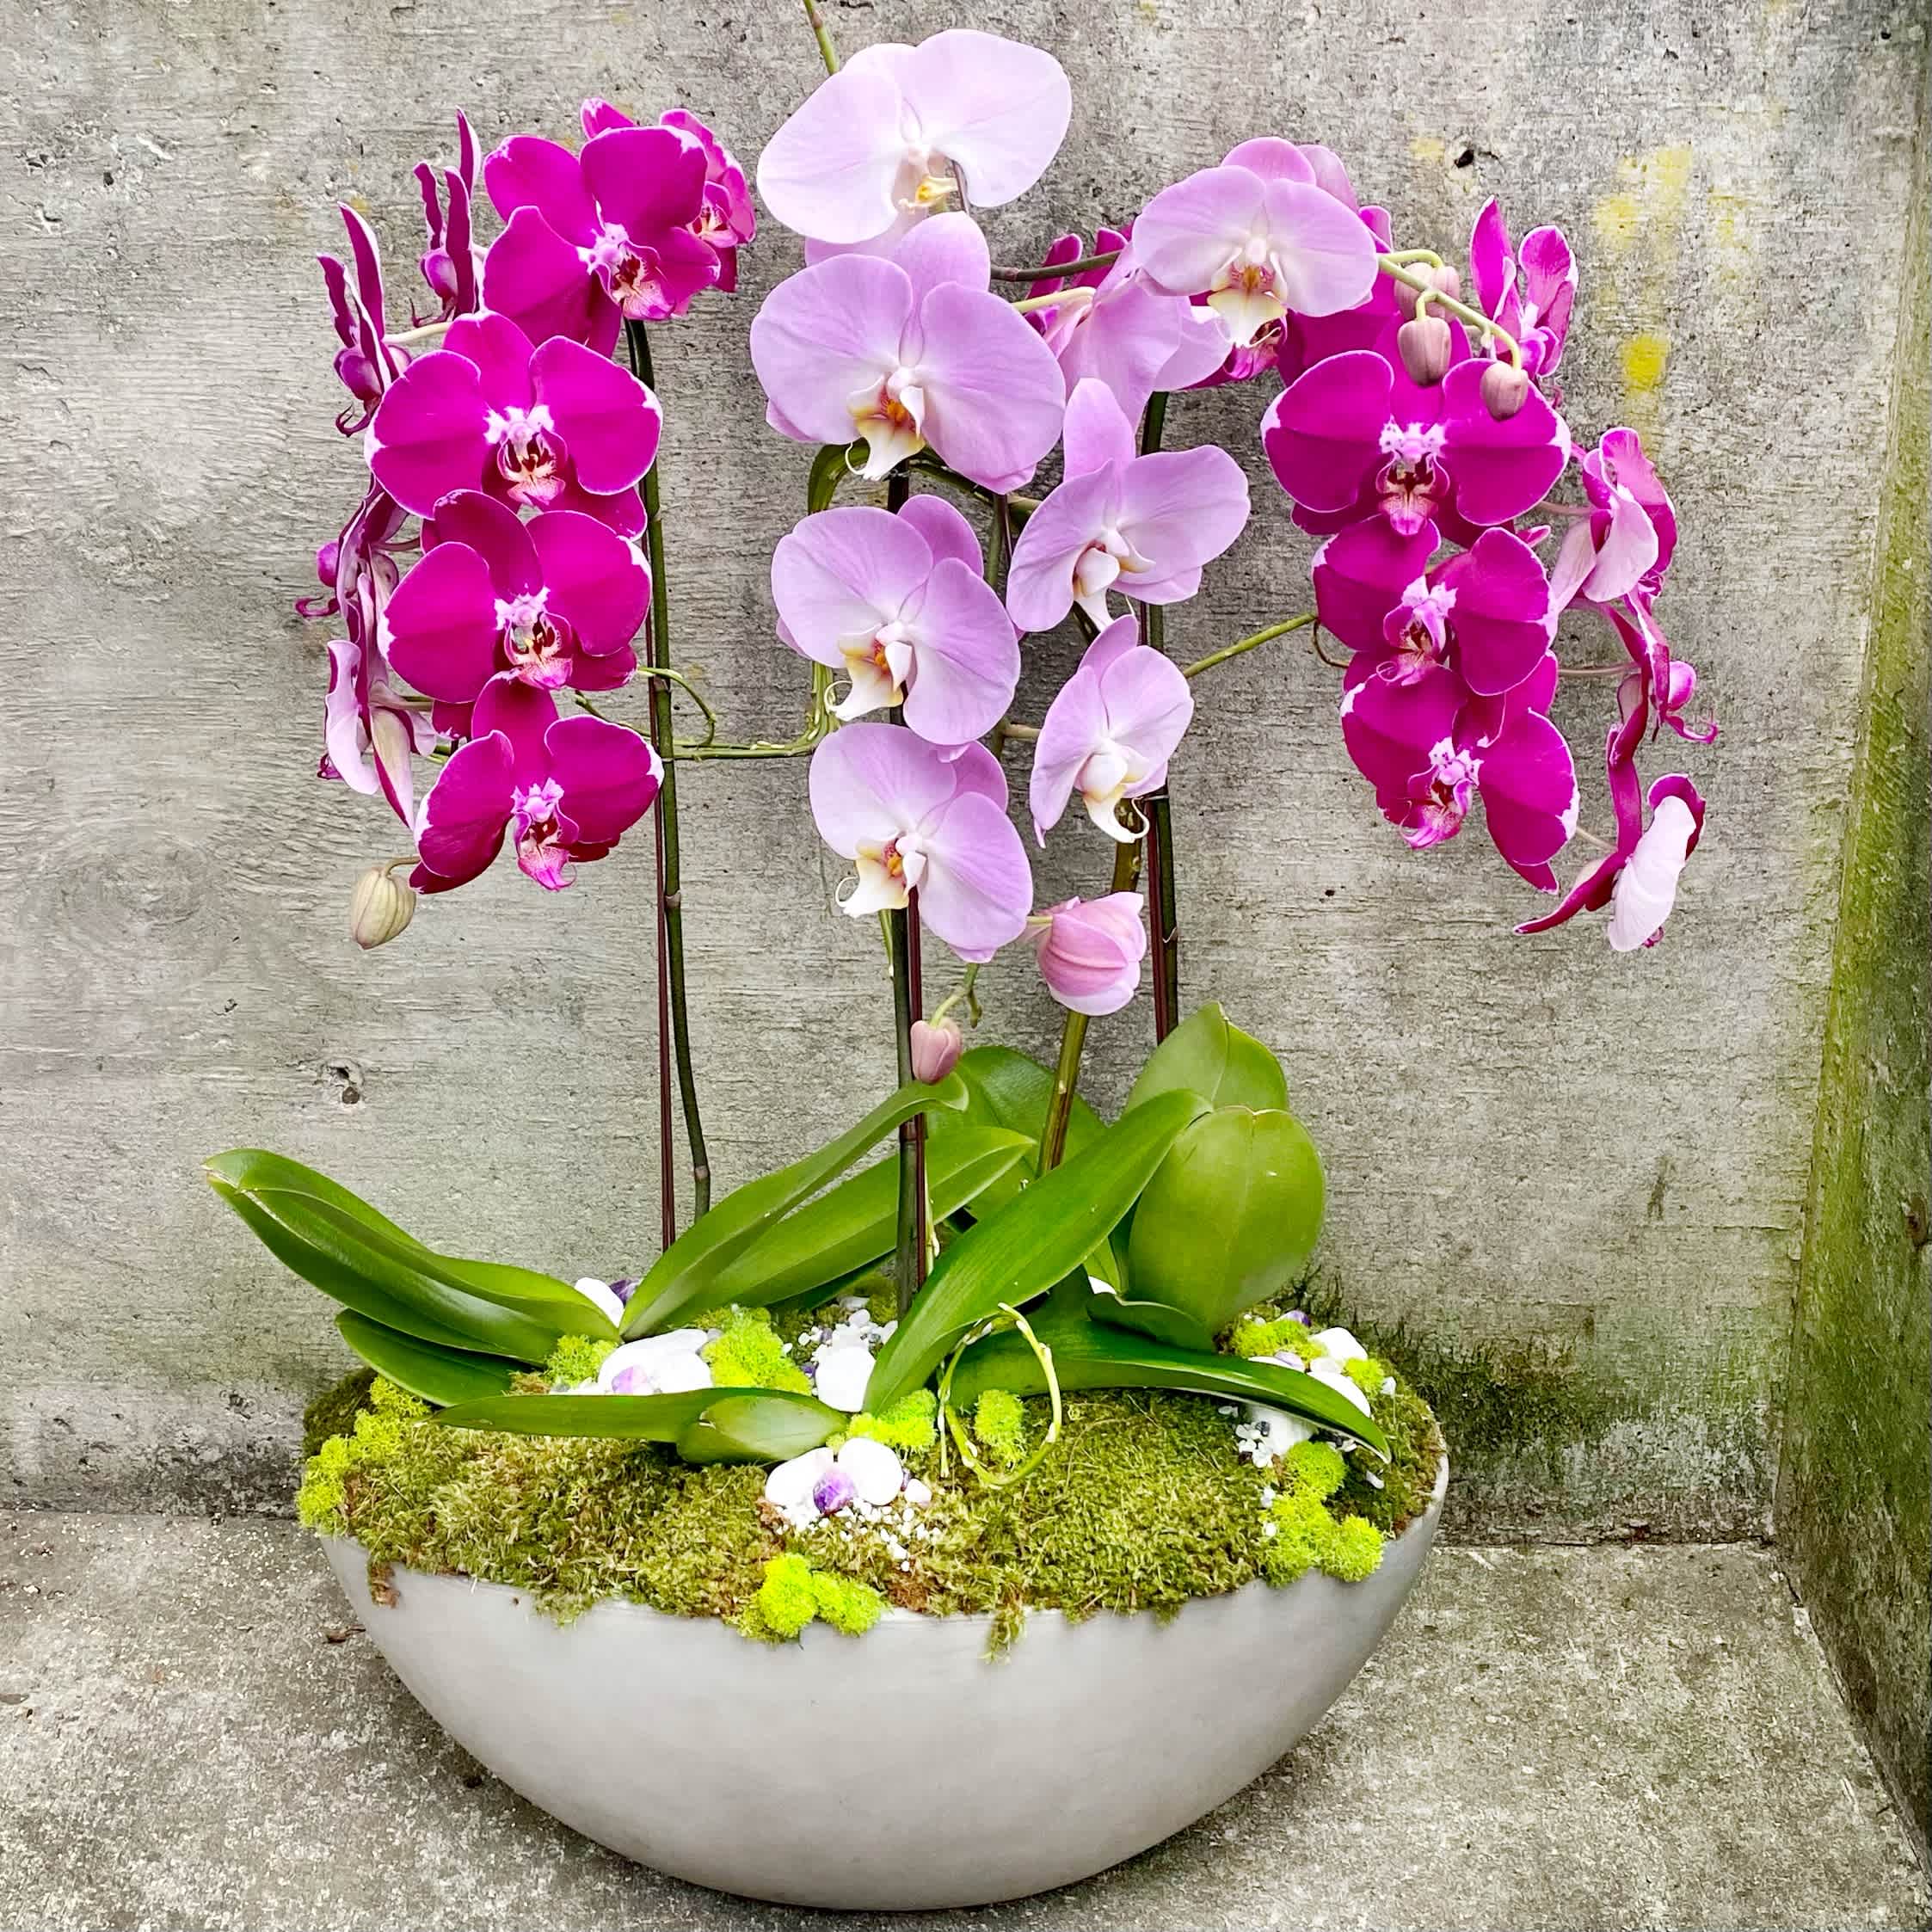 Color Phalaenopsis Orchid Plant Trio - We take great pride in how we pot and dress our beautiful Phalaenopsis orchid plants. We choose stylish ceramic or fiber reinforced concrete containers and accent the orchids with moss, branches and interesting stones and textural elements. Whether it is for celebration or sympathy, our orchid trio has a wow factor that is sure to impress the recipient.  We try to always stock a nice variety of orchid plants. This trio is also stunning with three white orchid plants which is available for $295. Double stem plants in both white and color are also available but may require advanced notice for us to source them. Call for pricing on double-stem plants.  All orchid plants are delivered with detailed care instructions to make it easy for the recipient to care for them and to get them to rebloom. Container and accents may vary from the photographs but will always be appropriate for the occasion.  Orchid plants will vary in height but are generally 28 to 36 inches tall.